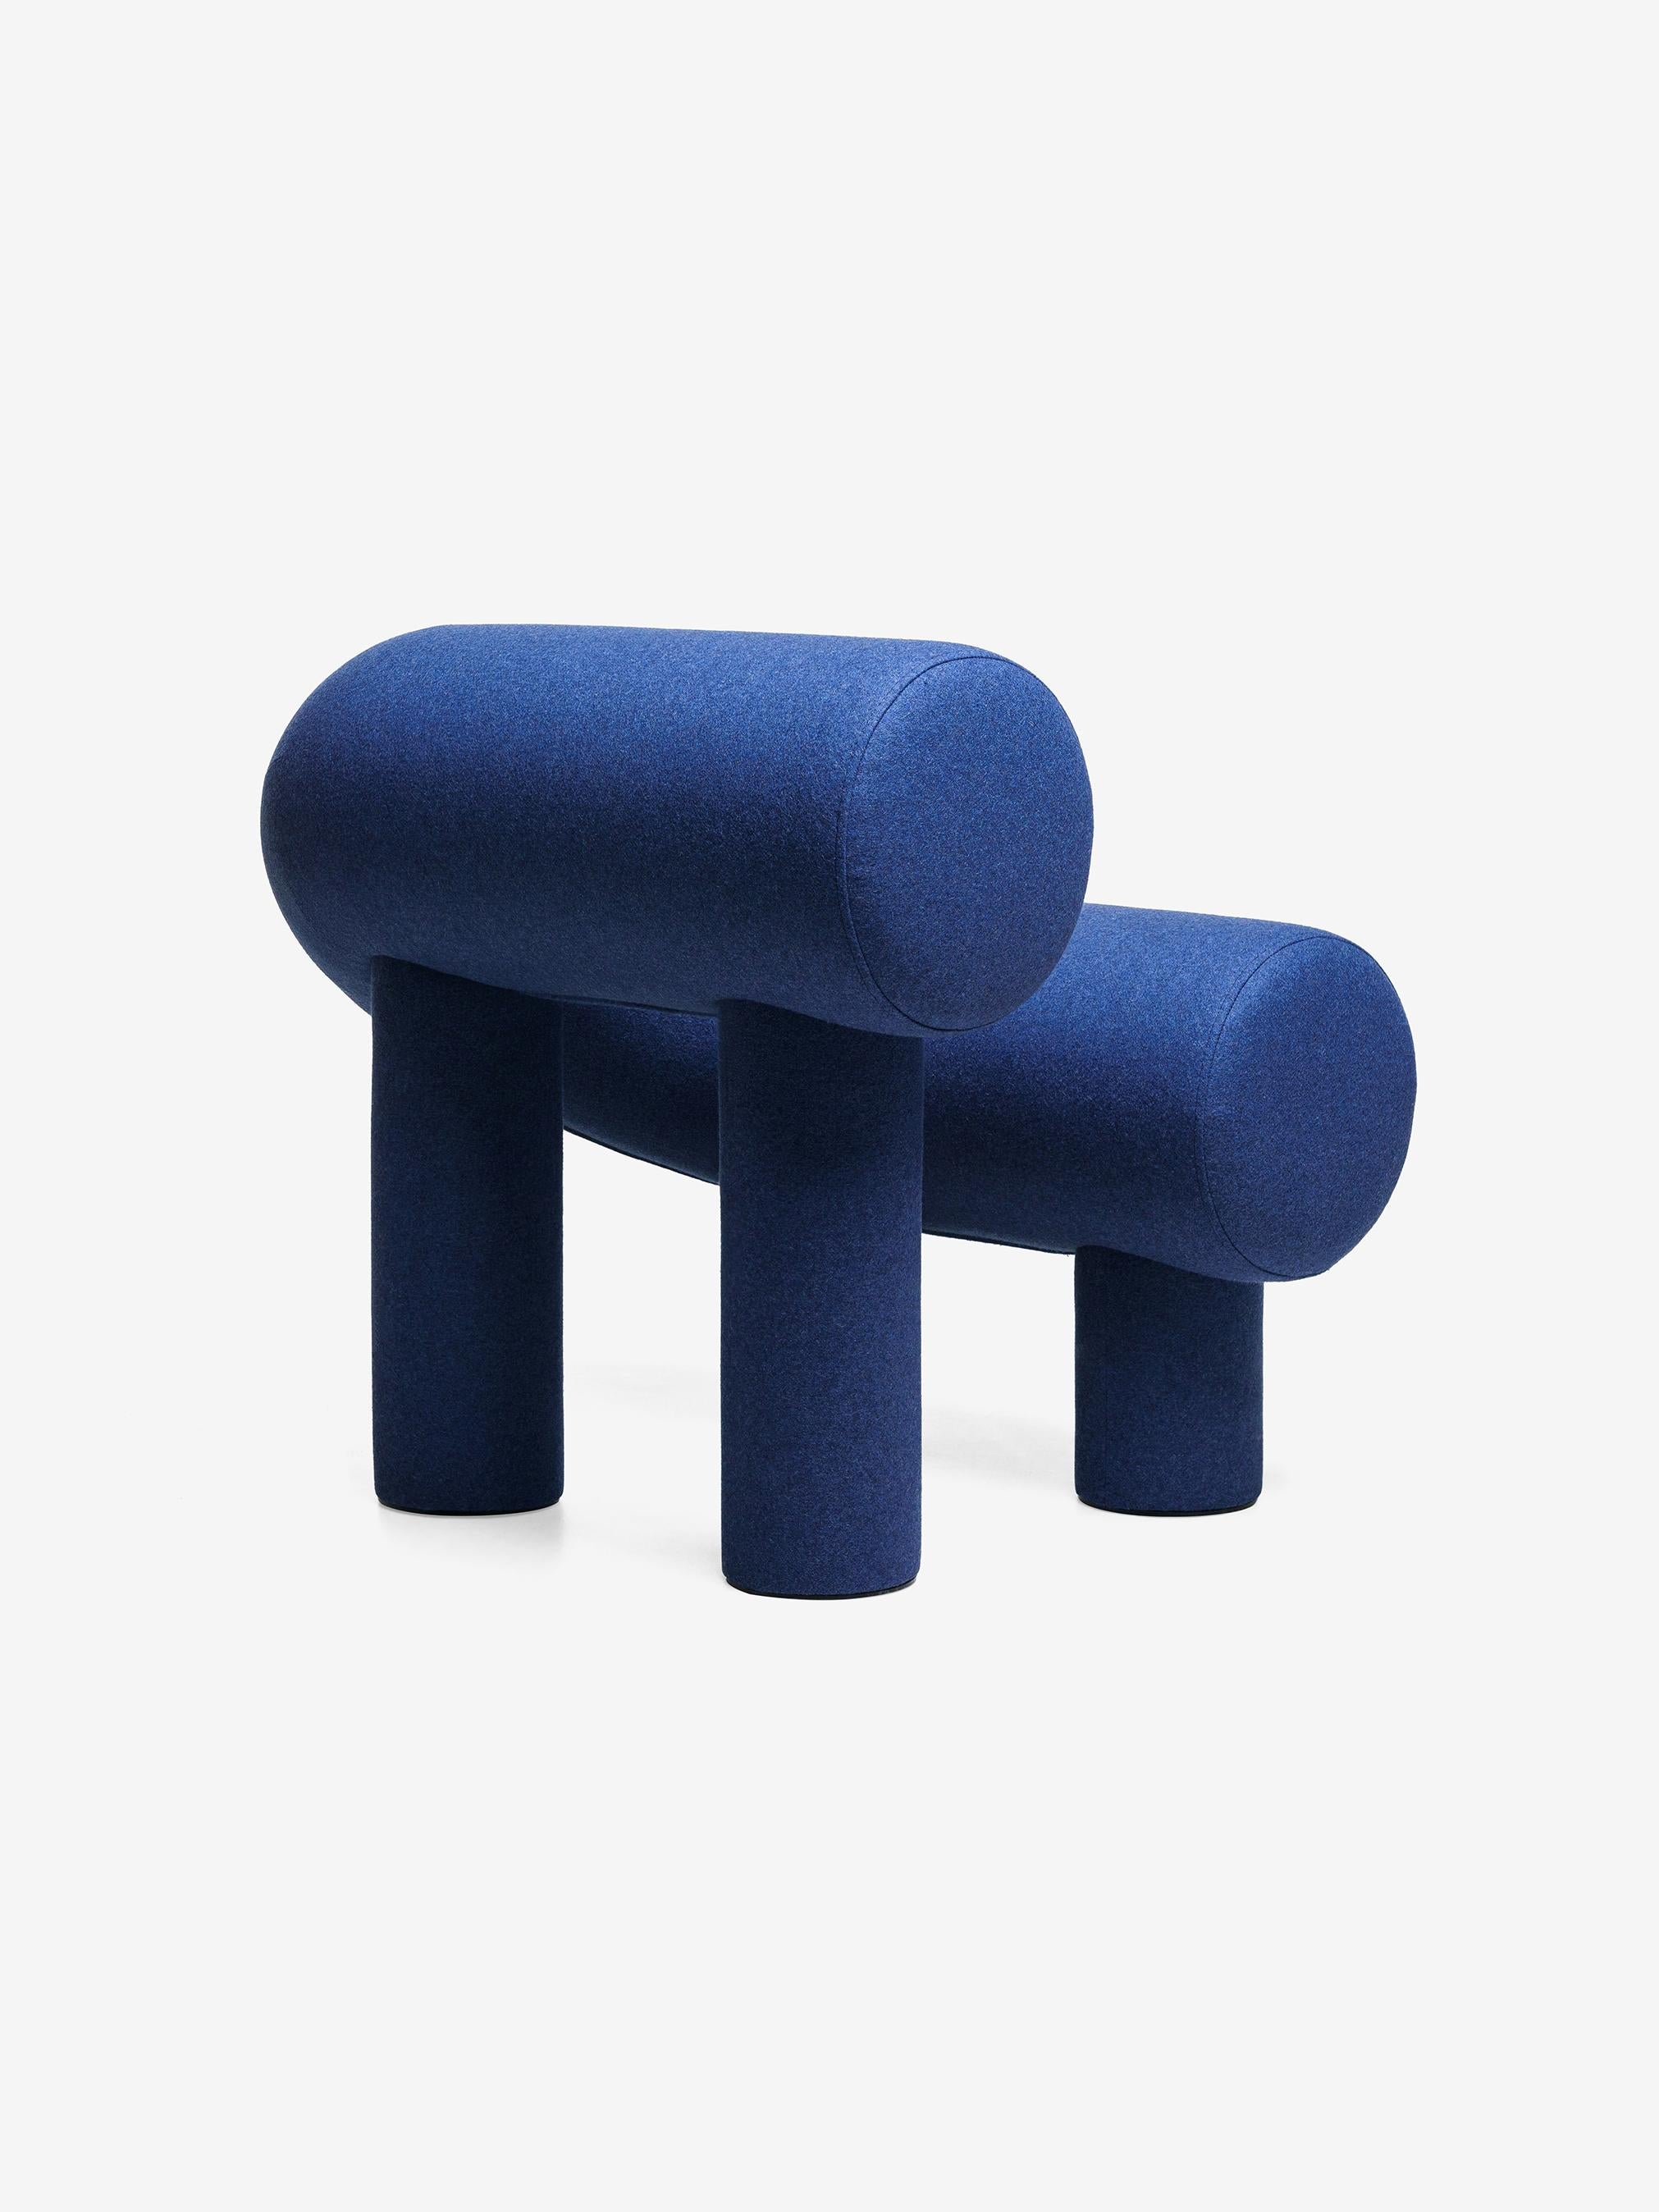 Designer Rostislav Sorokoviy aimed to create an object that resembles a soft sculpture rather than a piece of furniture. 
The seat and back of the armchair consist of two cylinders joined in a horseshoe shape. The legs are also cylindrical, and the